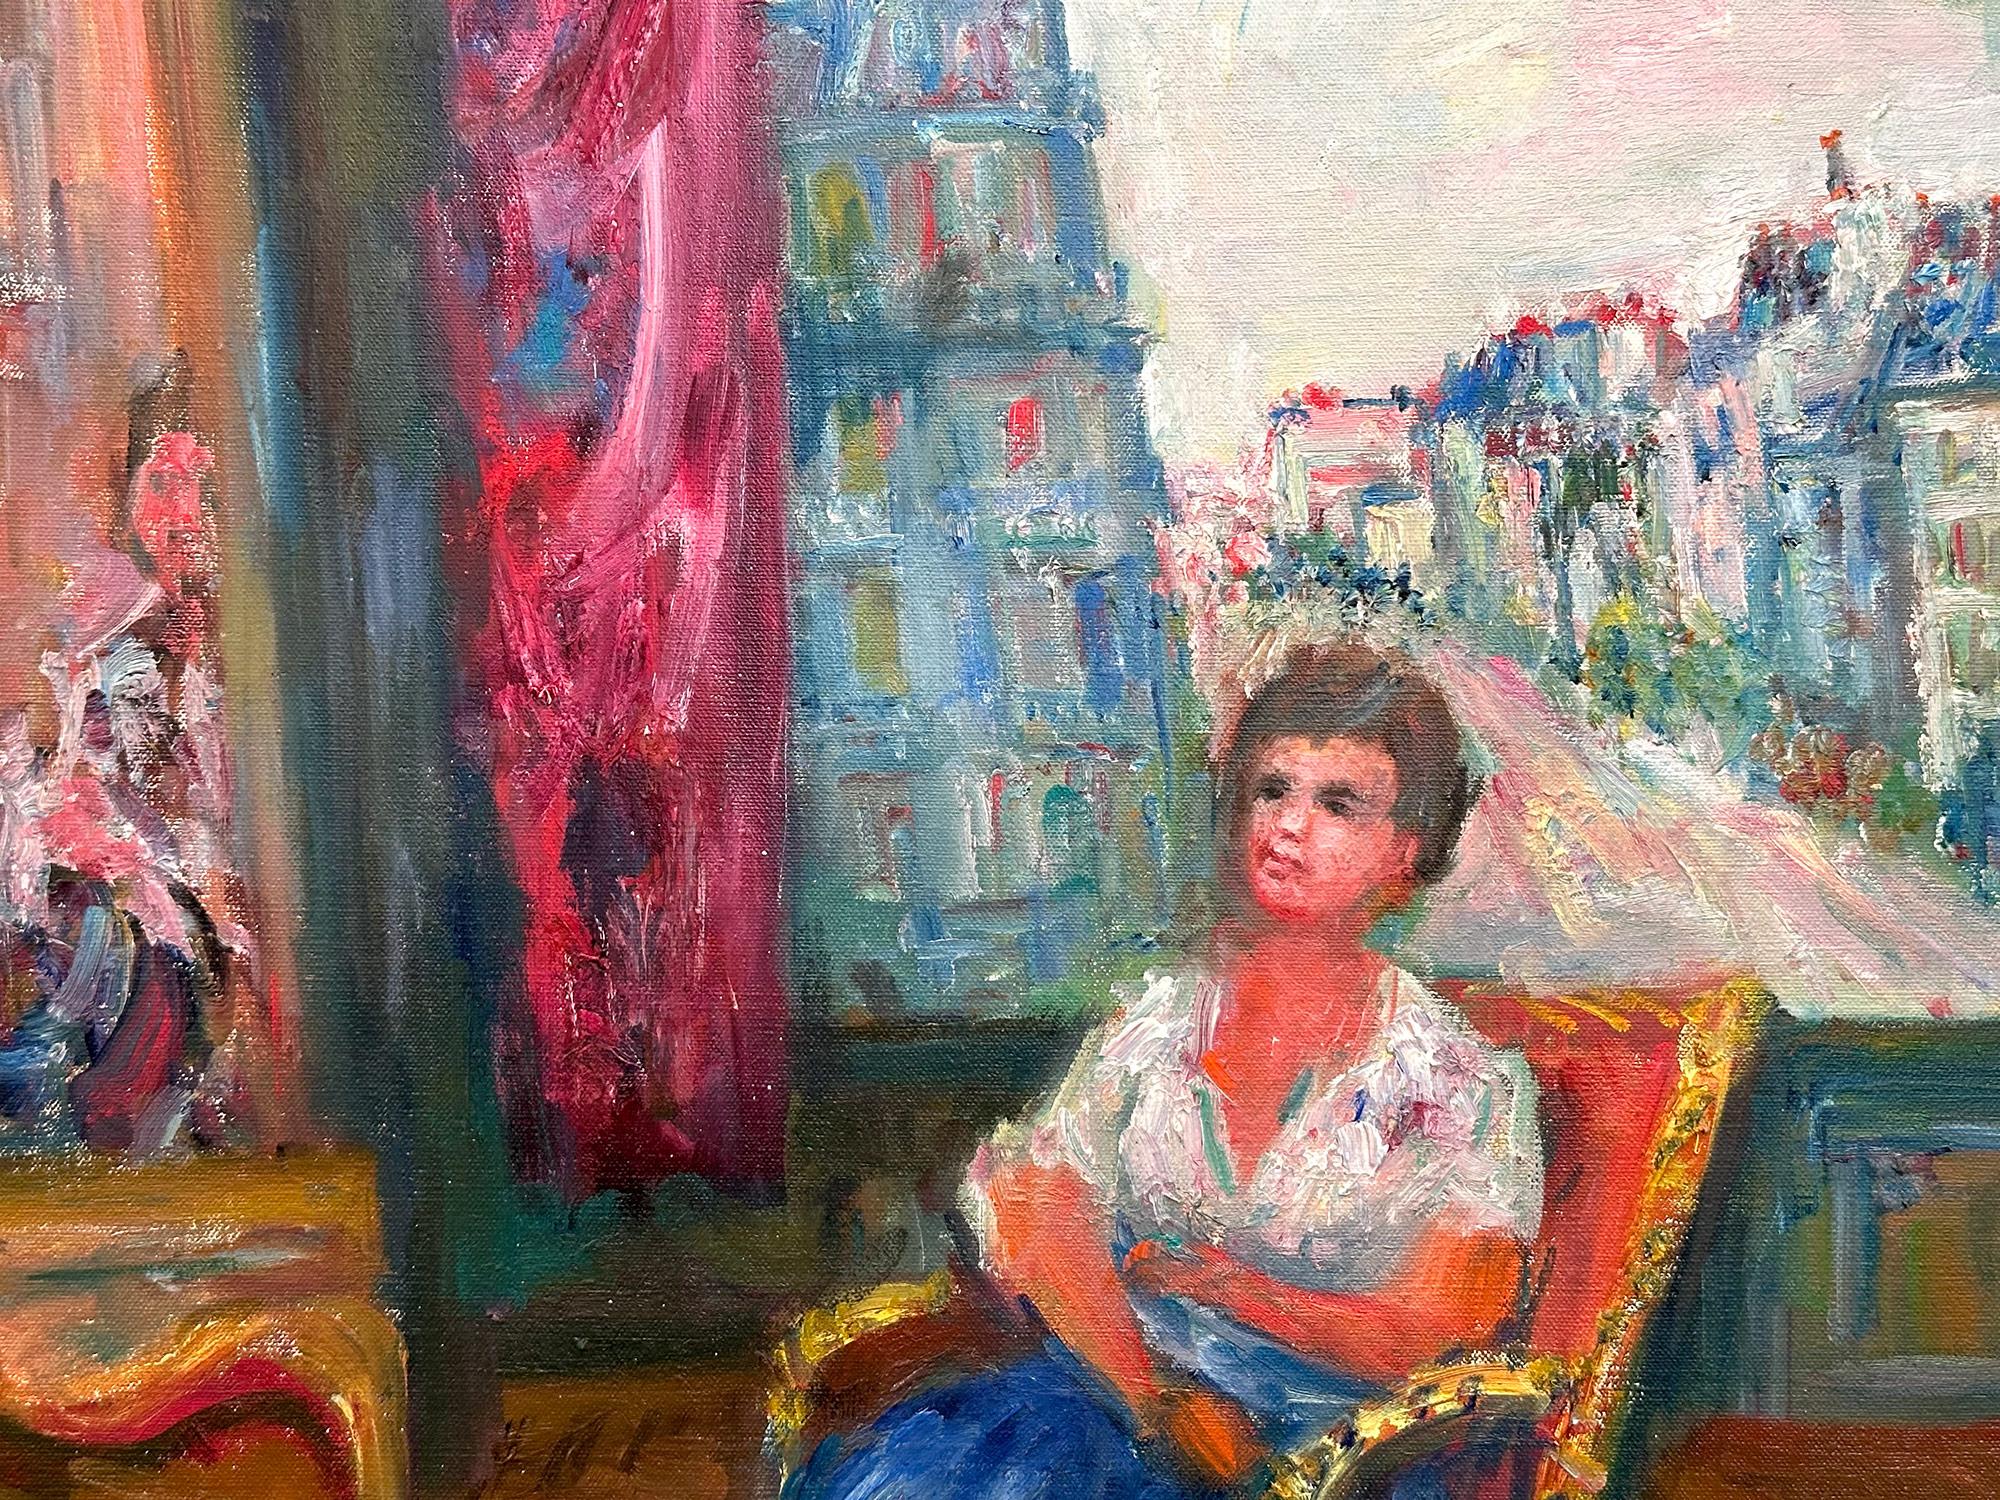 This painting depicts an interior scene of a woman seated at an apartment in Paris with a window that overlooks the city and an iconic church with the artist's reflection in the armoire's mirrors. The fun and colorful details are what makes this